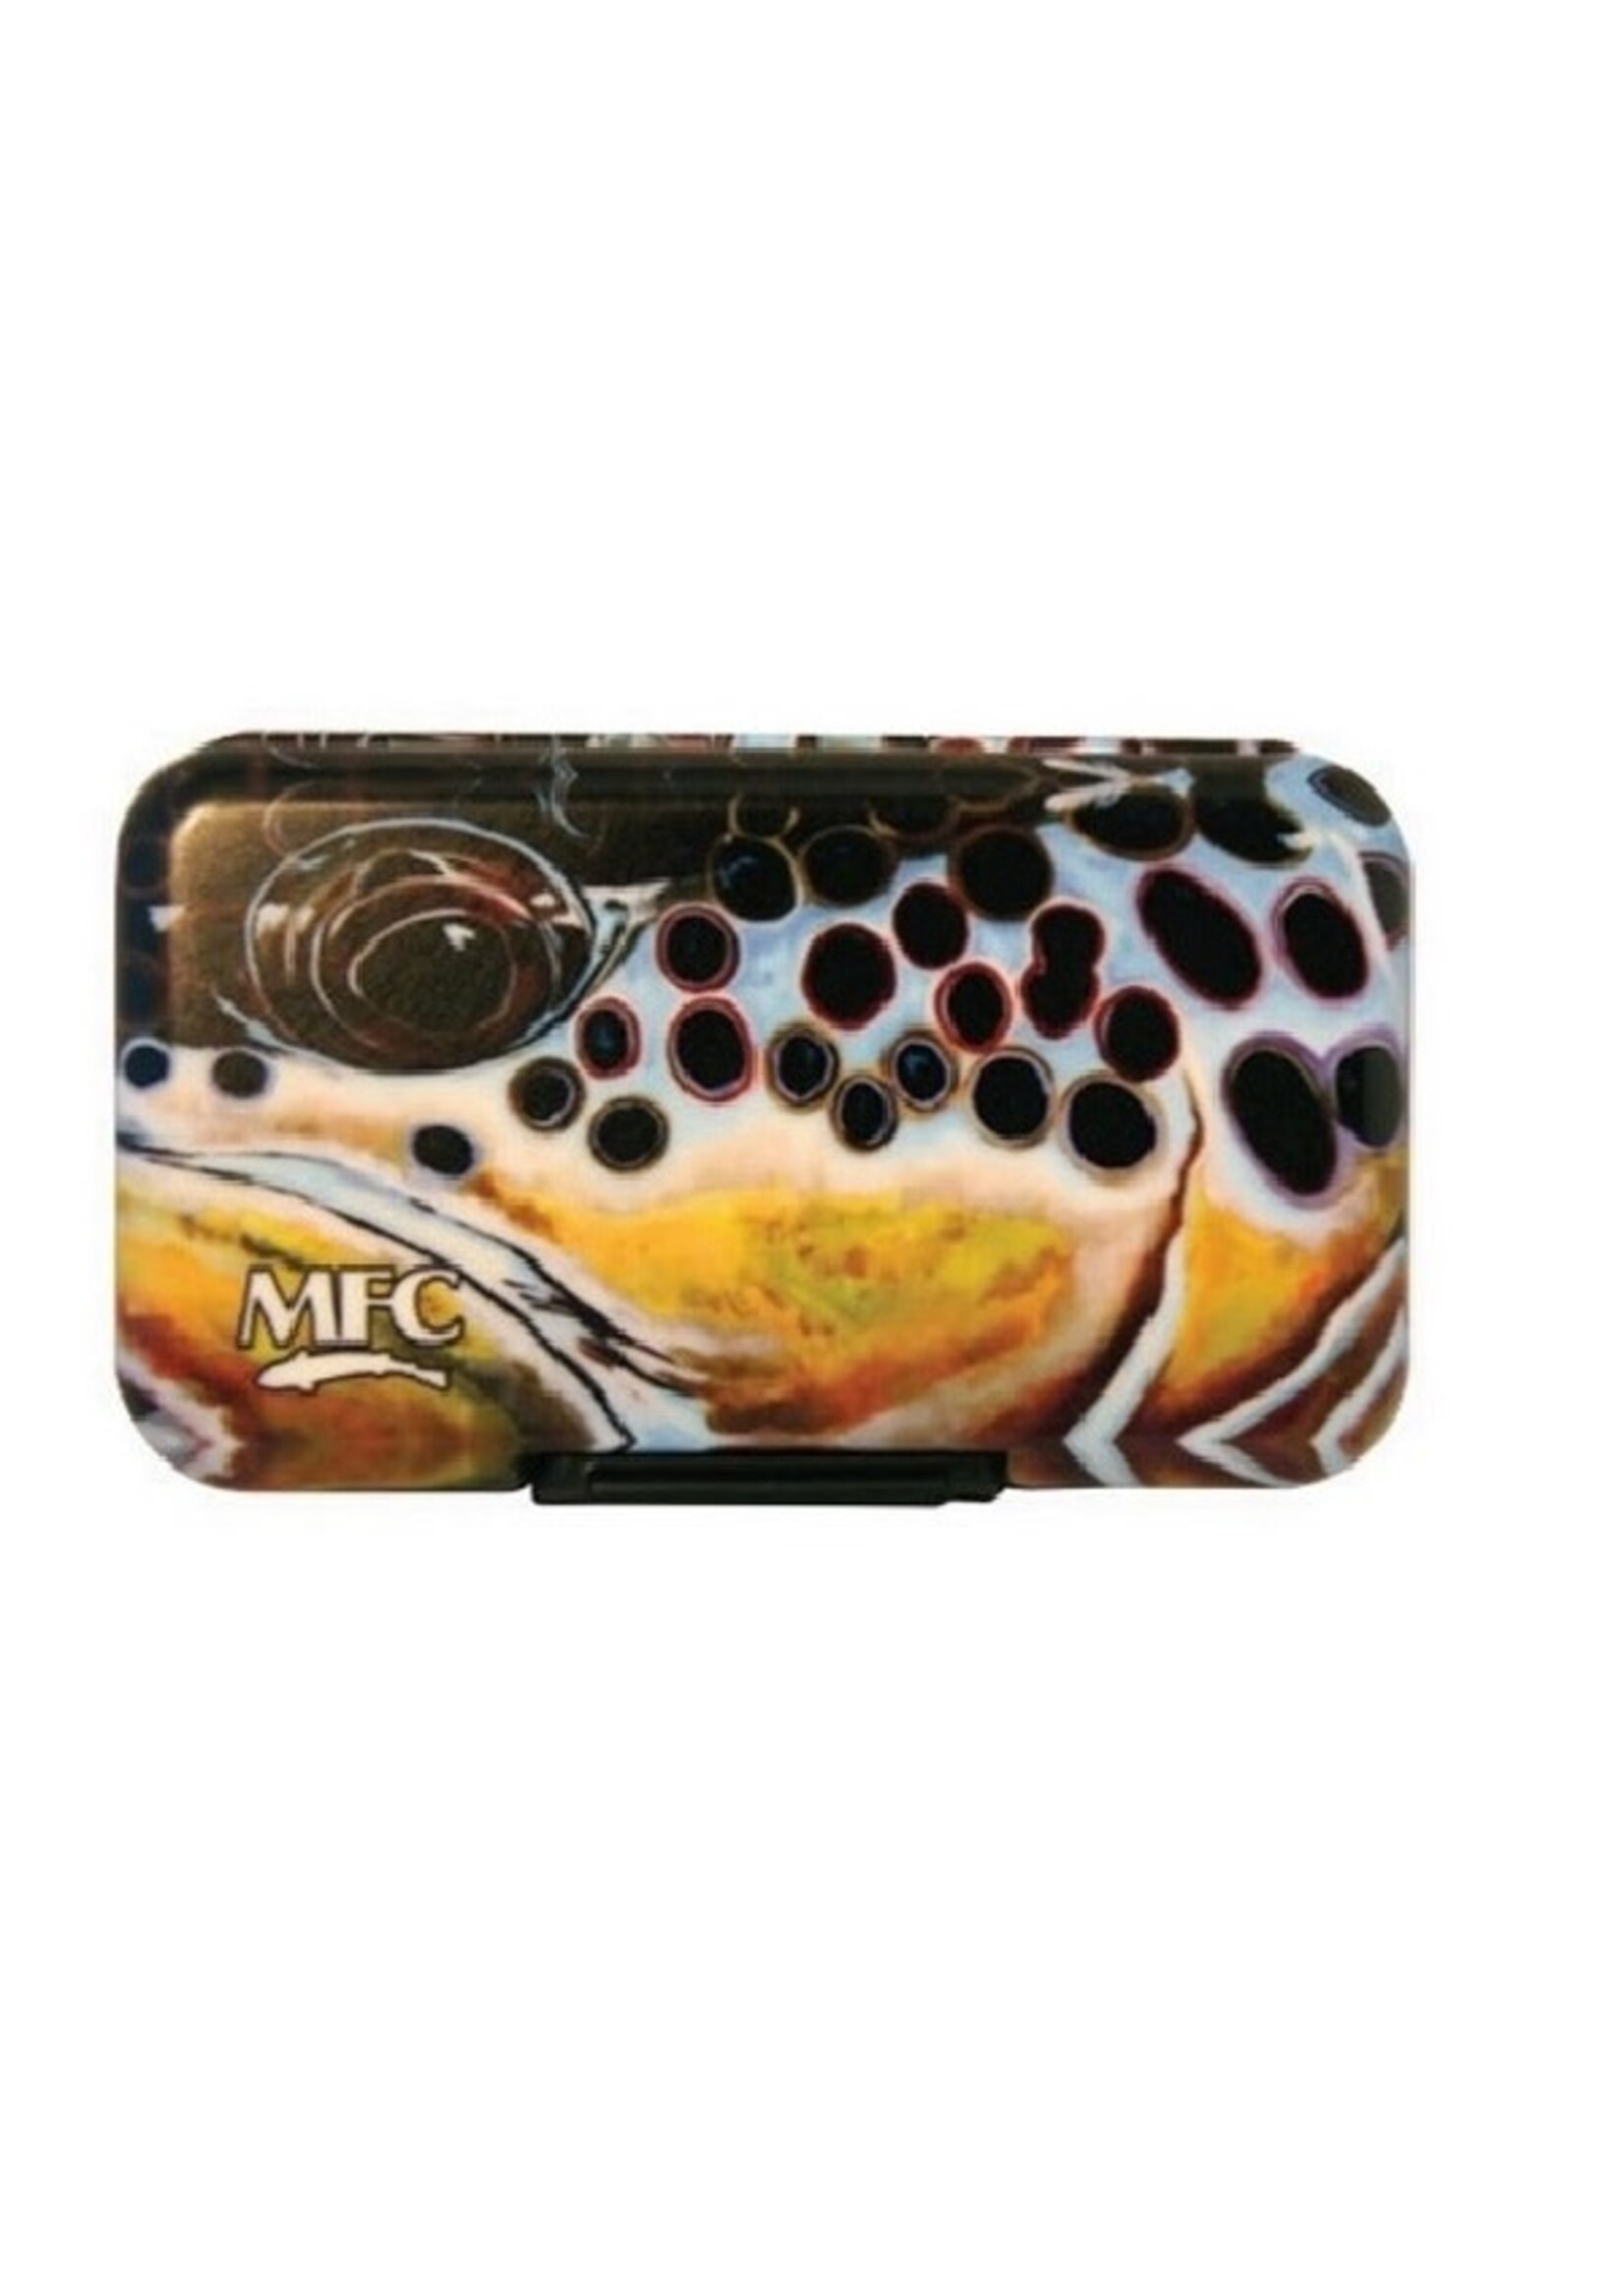 Montana Fly Company MFC Poly Fly Box - Udesen's Extreme Brown